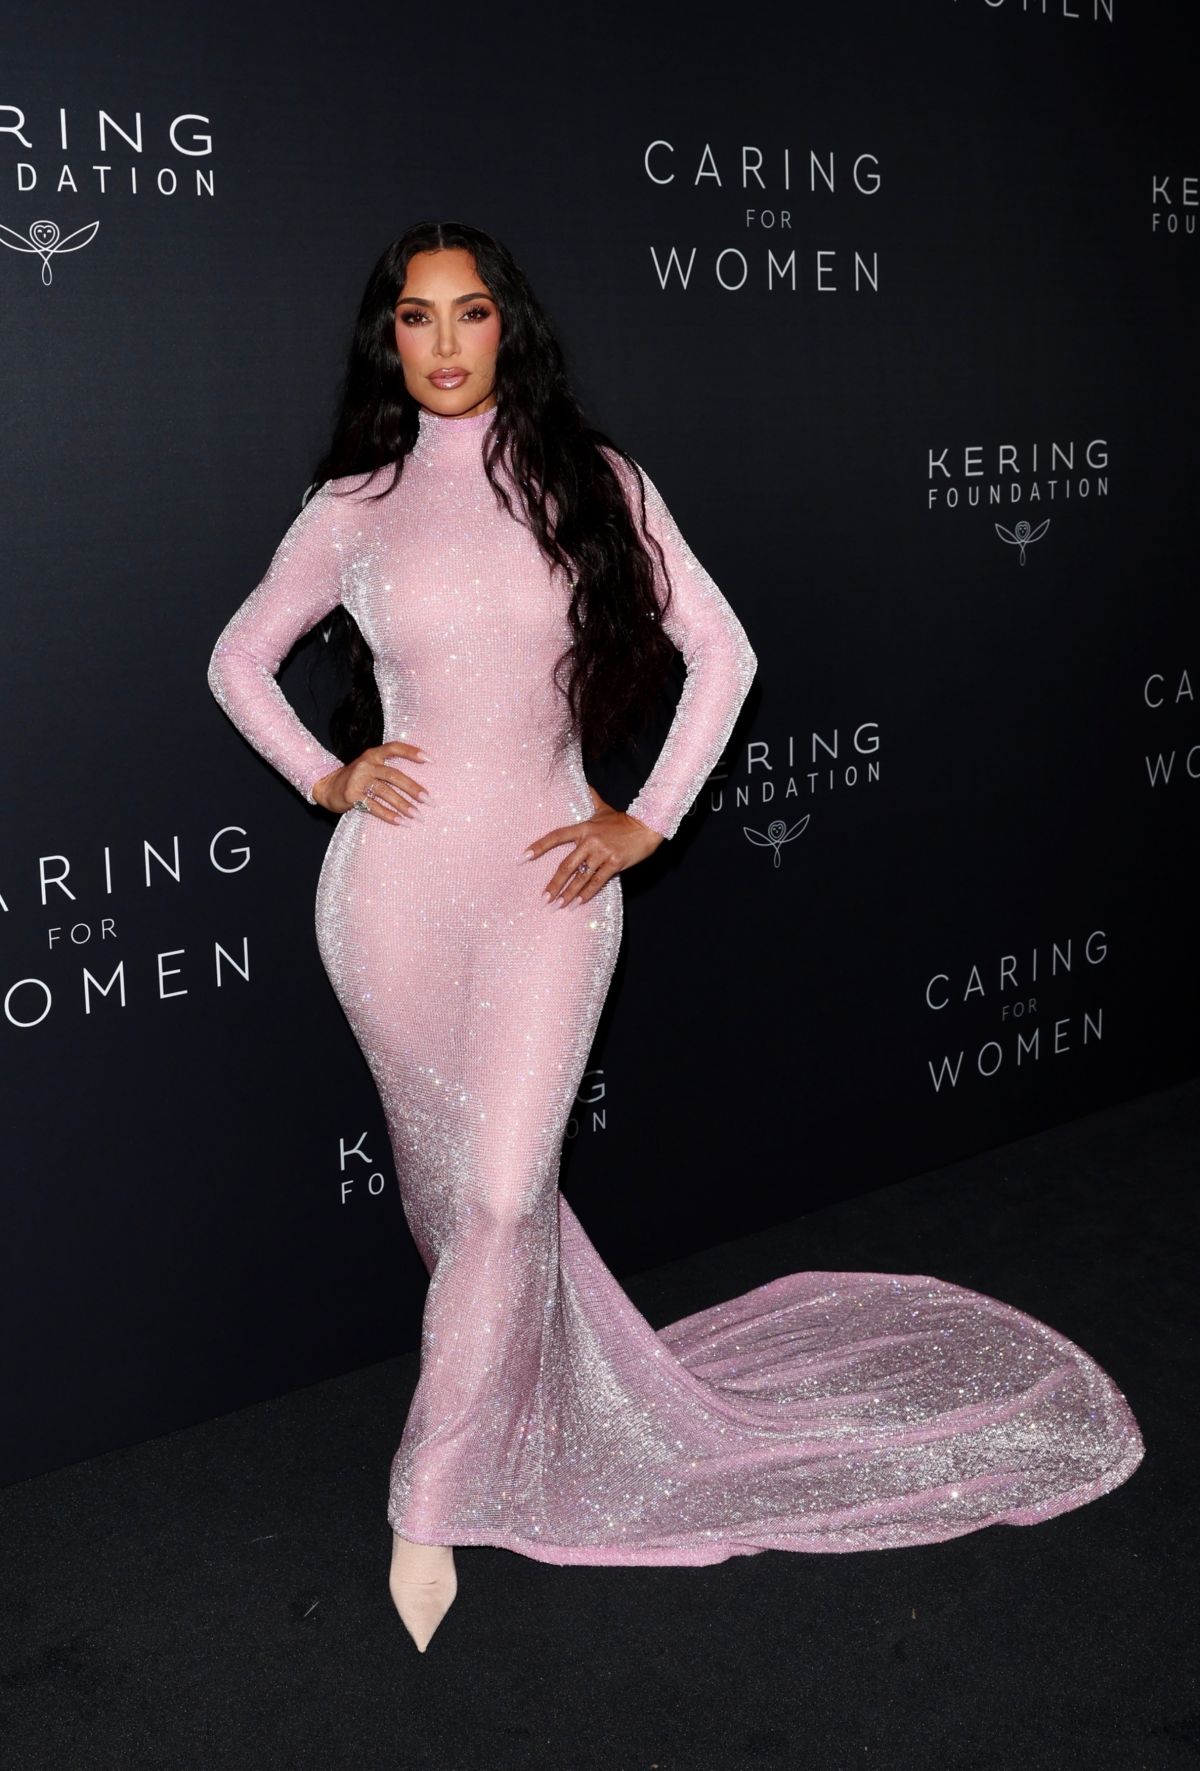 KIM KARDASHIAN at Kering Hosts 2nd Annual Caring for Women in New York ...